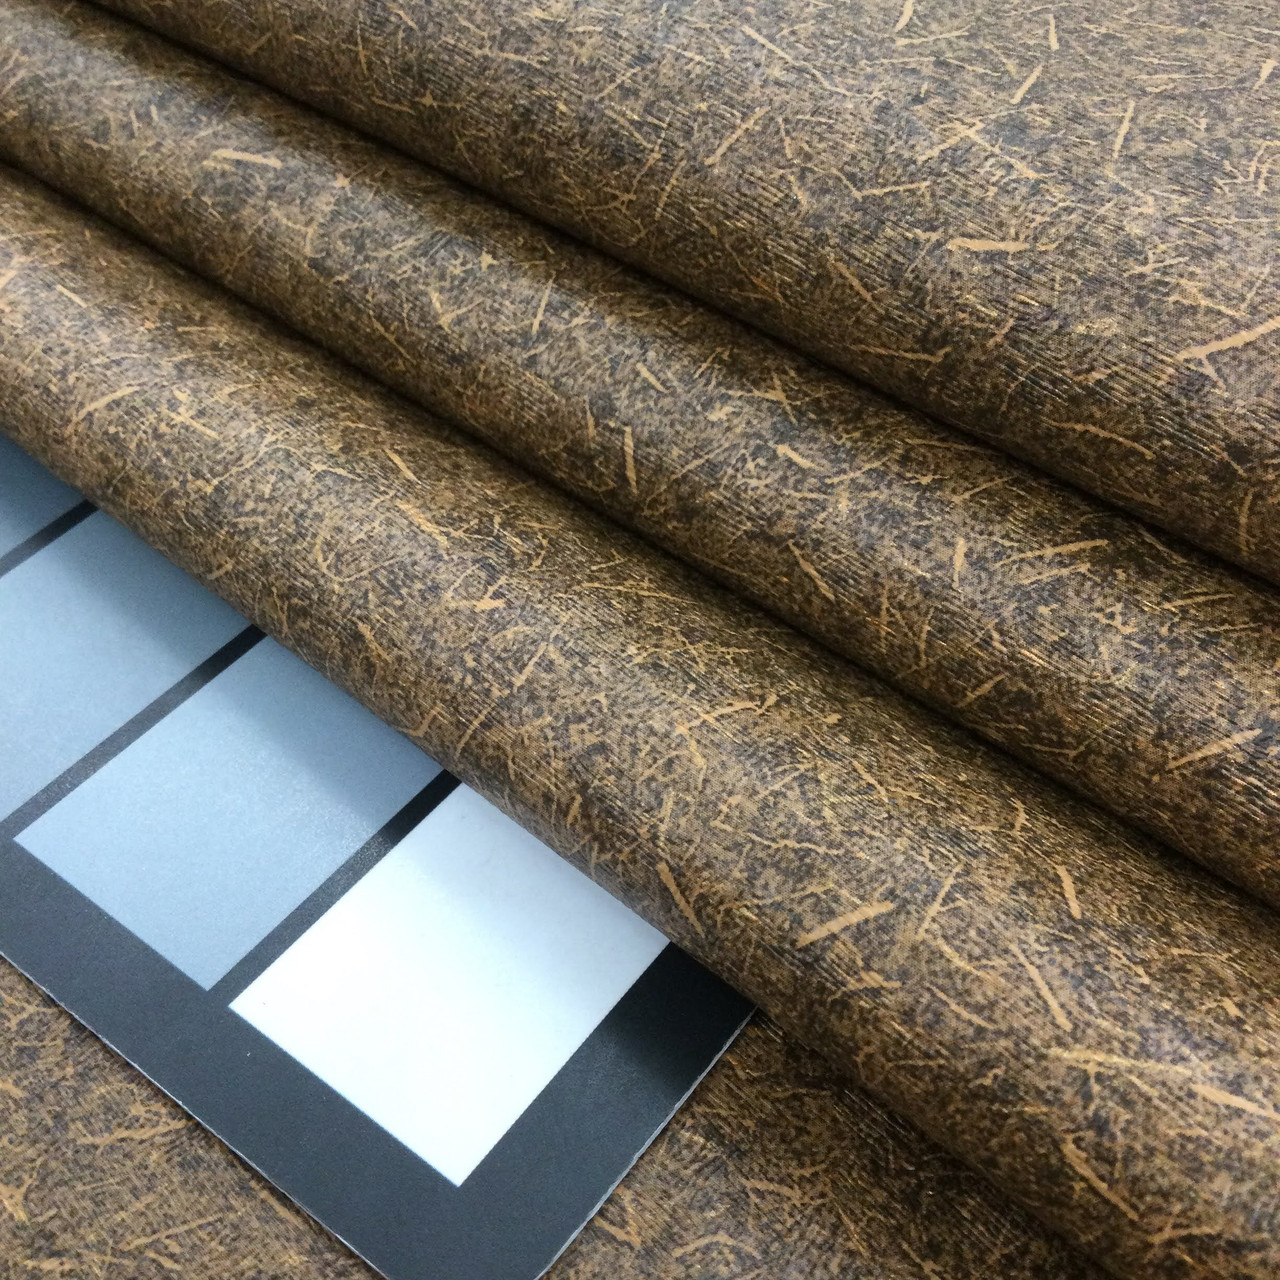 Mottled Brown Felt-Backed Faux Leather Vinyl Fabric | Upholstery / Bag  Making | 54 Wide | By the Yard